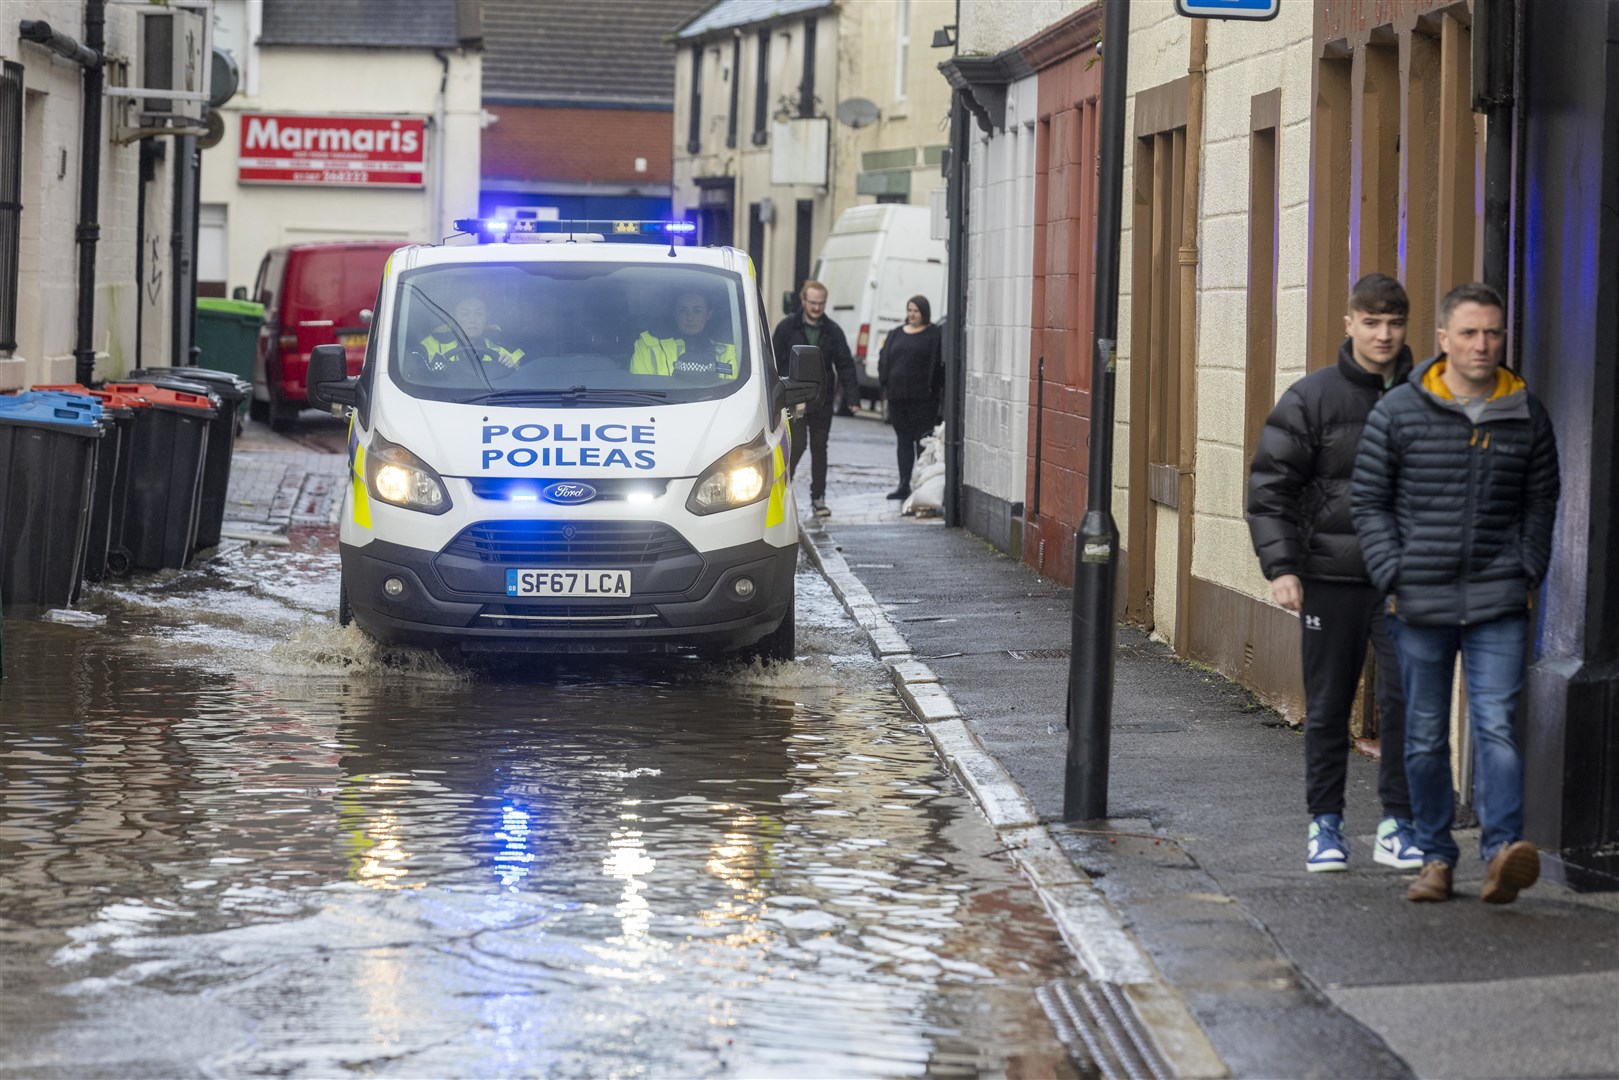 A police vehicle negotiates flooded roads in Whitesands, Dumfries (Robert Perry/PA)